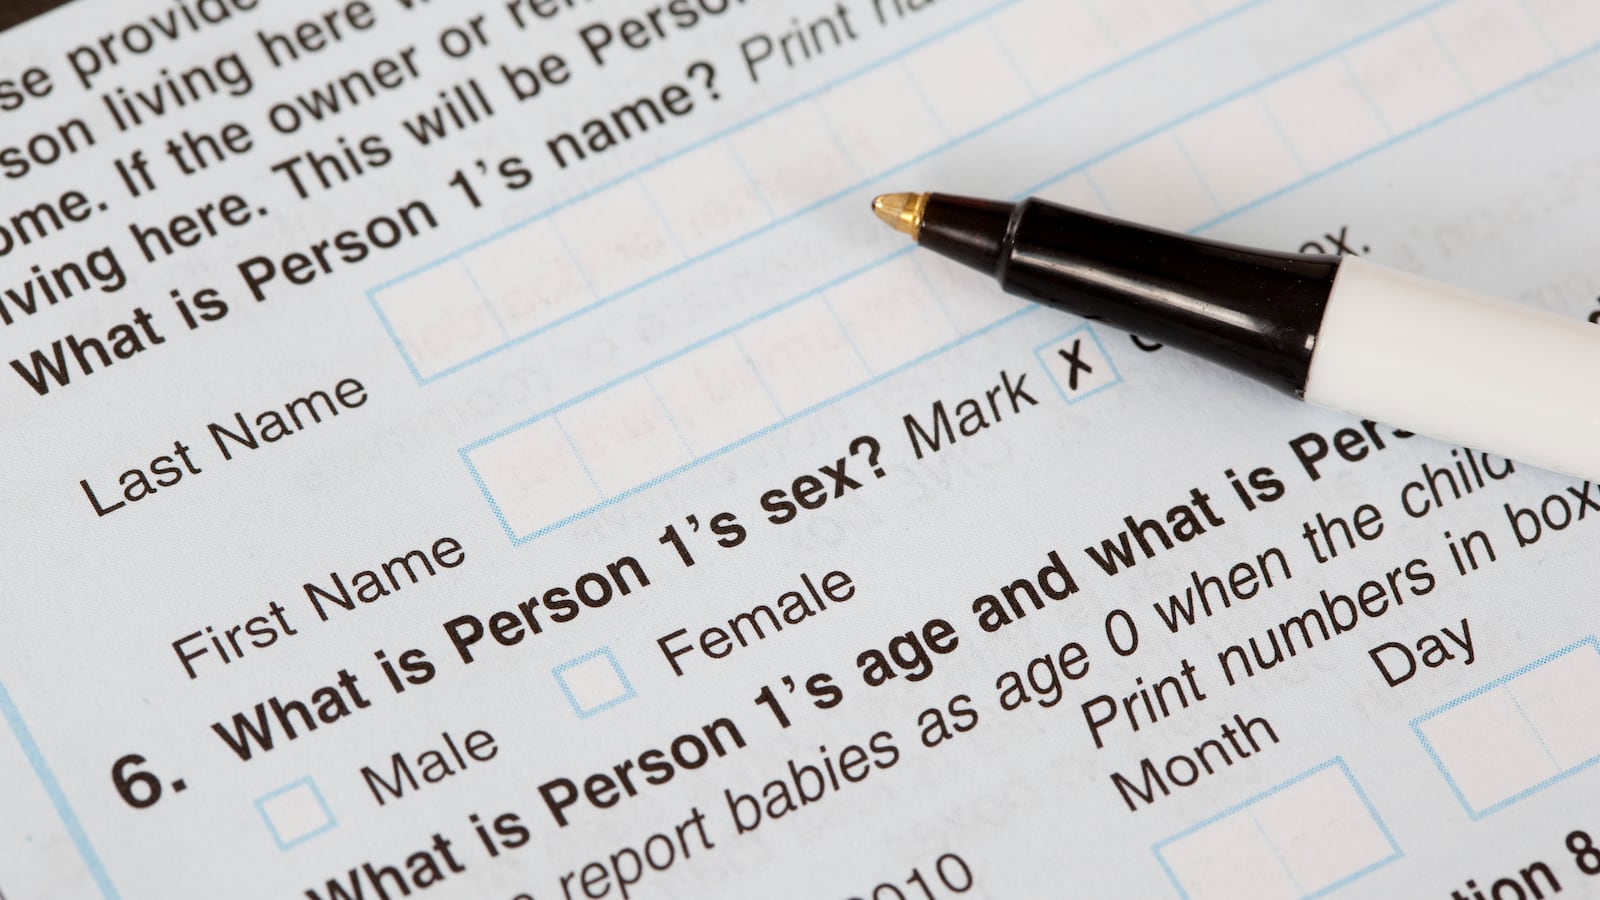 Photograph of a U.S. Census form and a ballpoint pen.